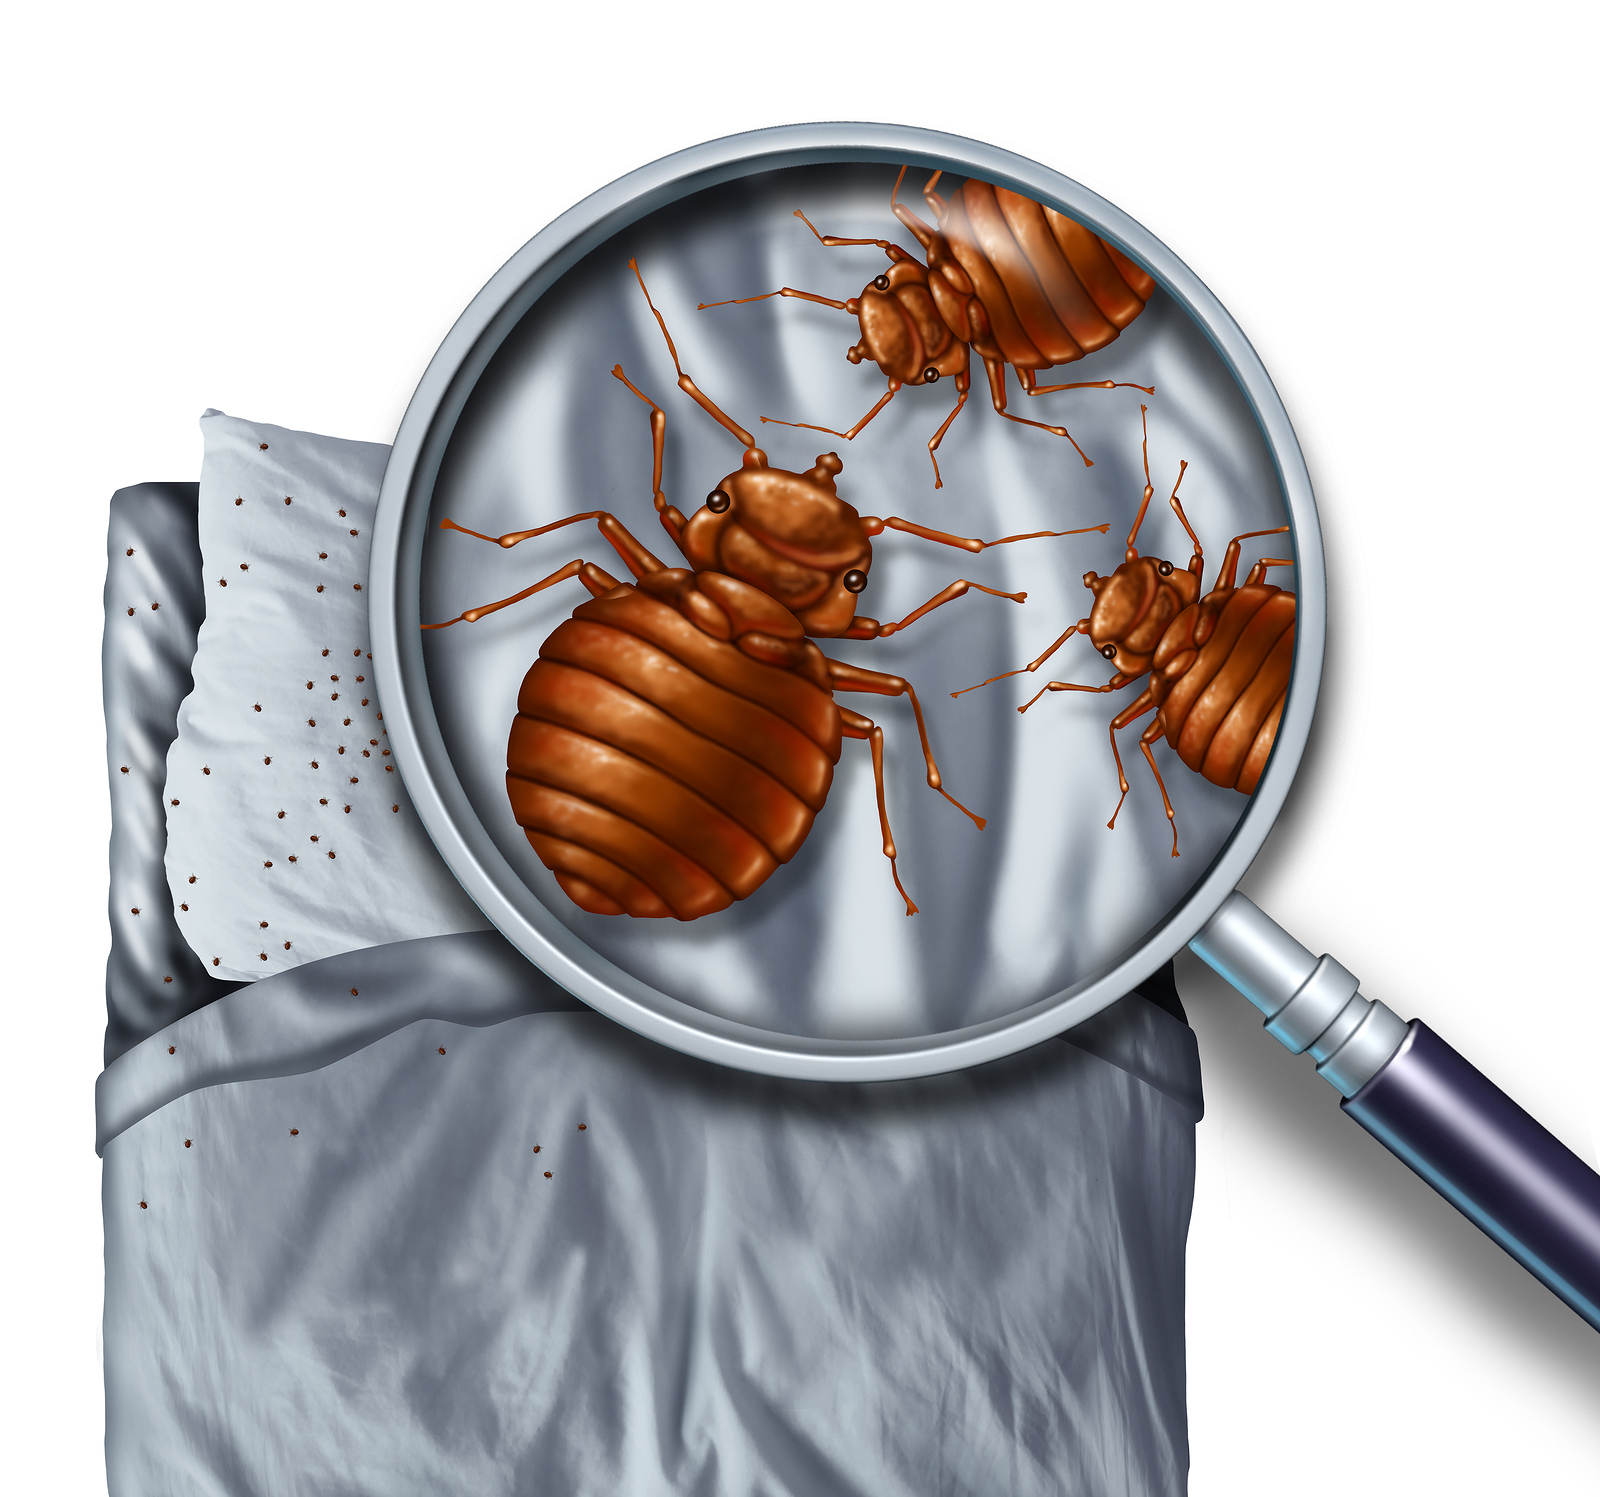 Warning For Travelers: Don’t Let the Bed Bugs Bite